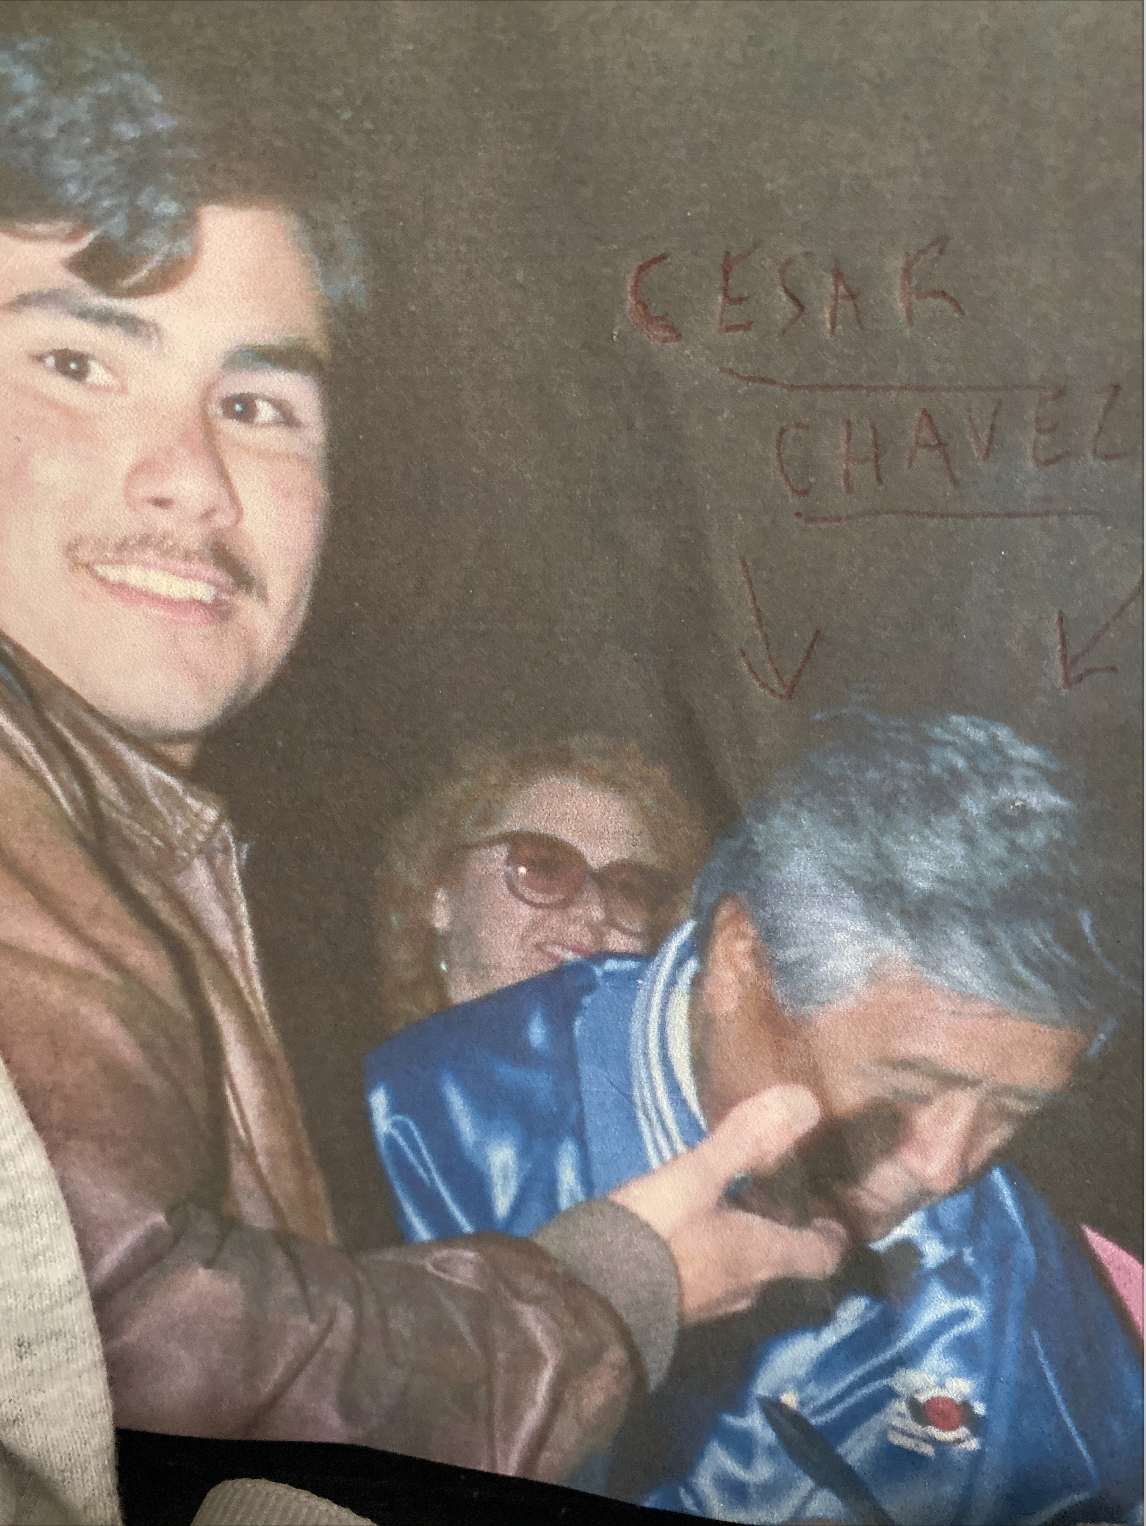 Angel Cervantes was one of the student leaders of the anti-Prop. 187 movement. Cervantes is photographed here with his hero, Cesar Chavez.